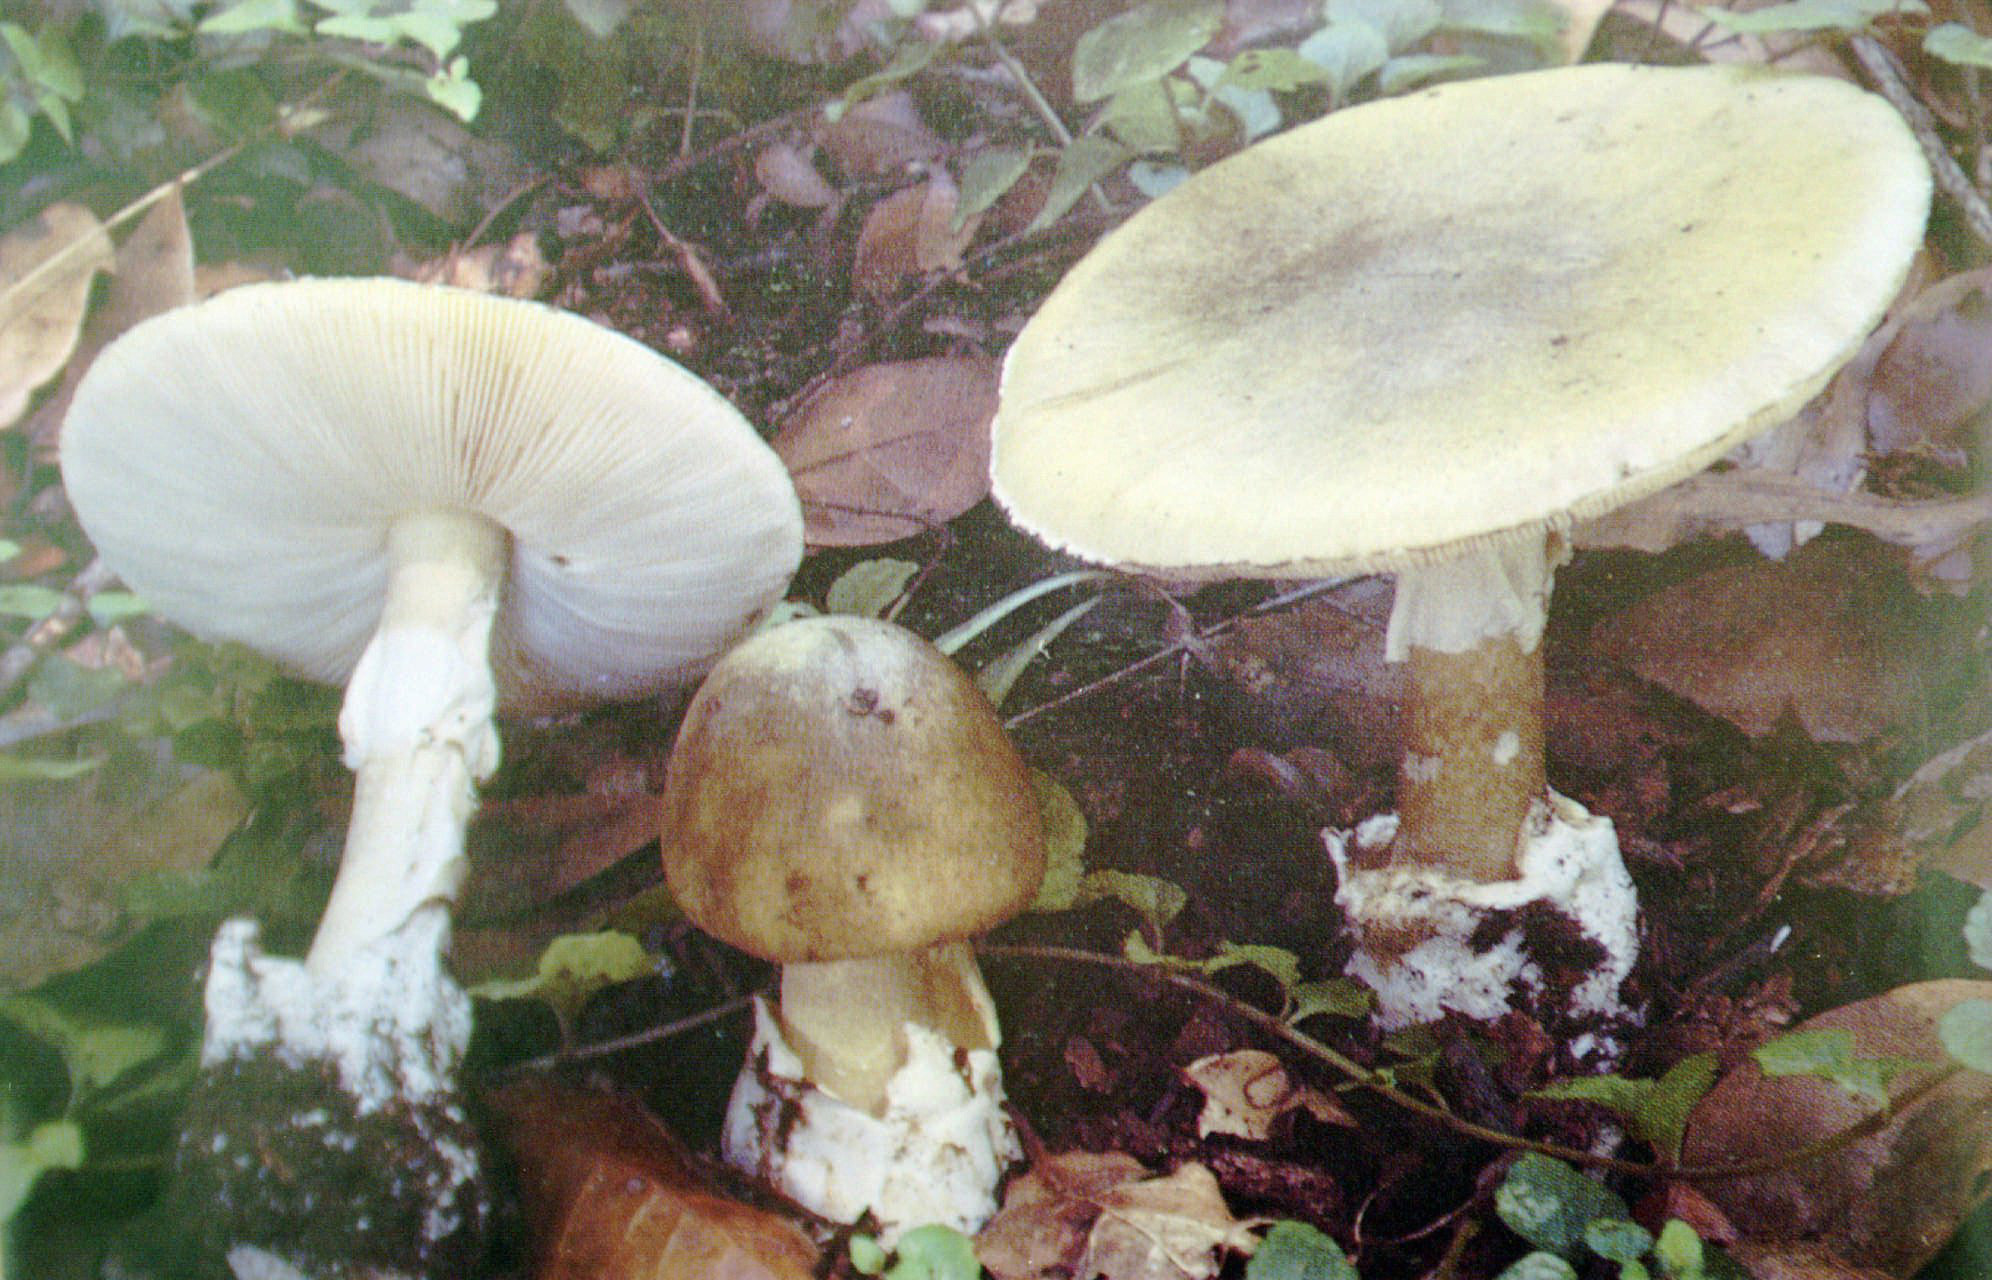 The world's most dangerous mushroom and what it did to an 18-month ...